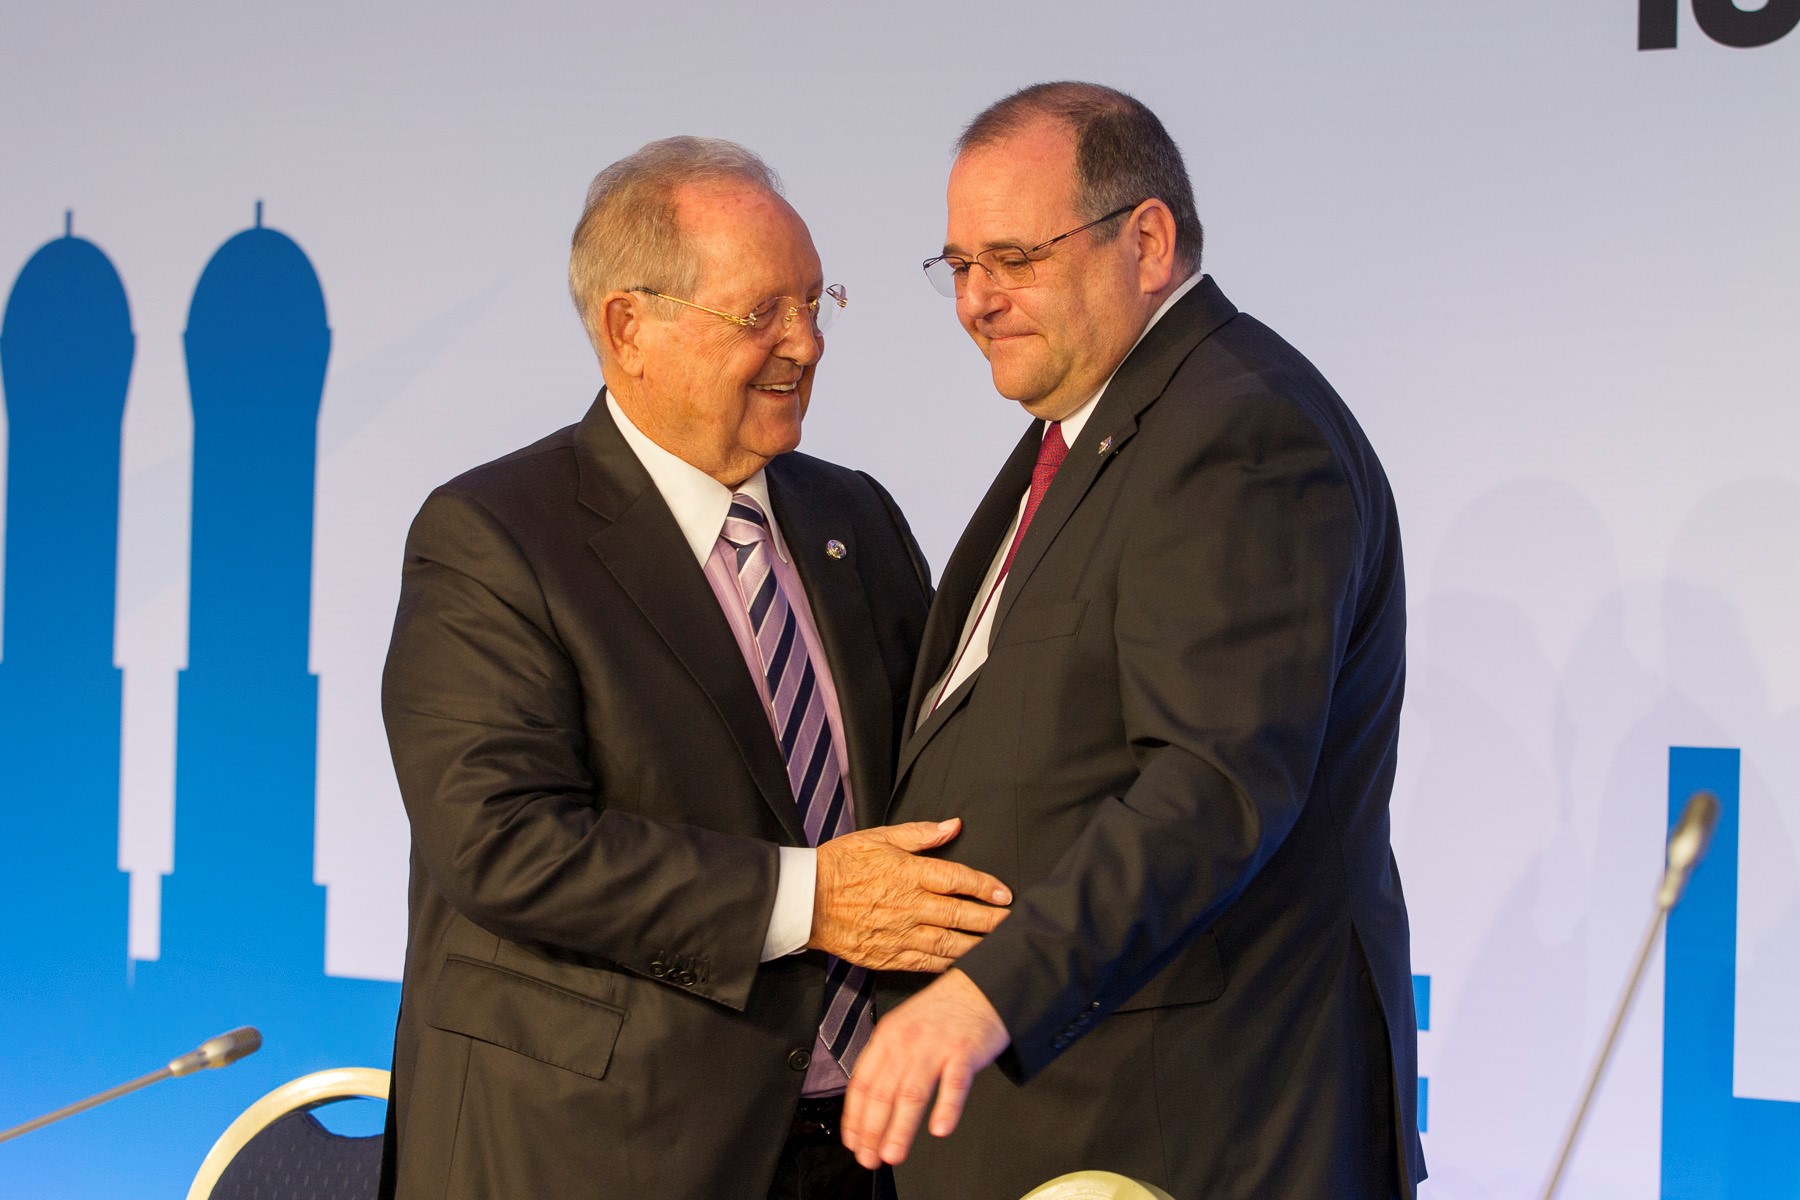 Olegario Vazquez Raña and Franz Schreiber have been elected President and secretary general of the ISSF during its General Assembly in Munich today ©ISSF